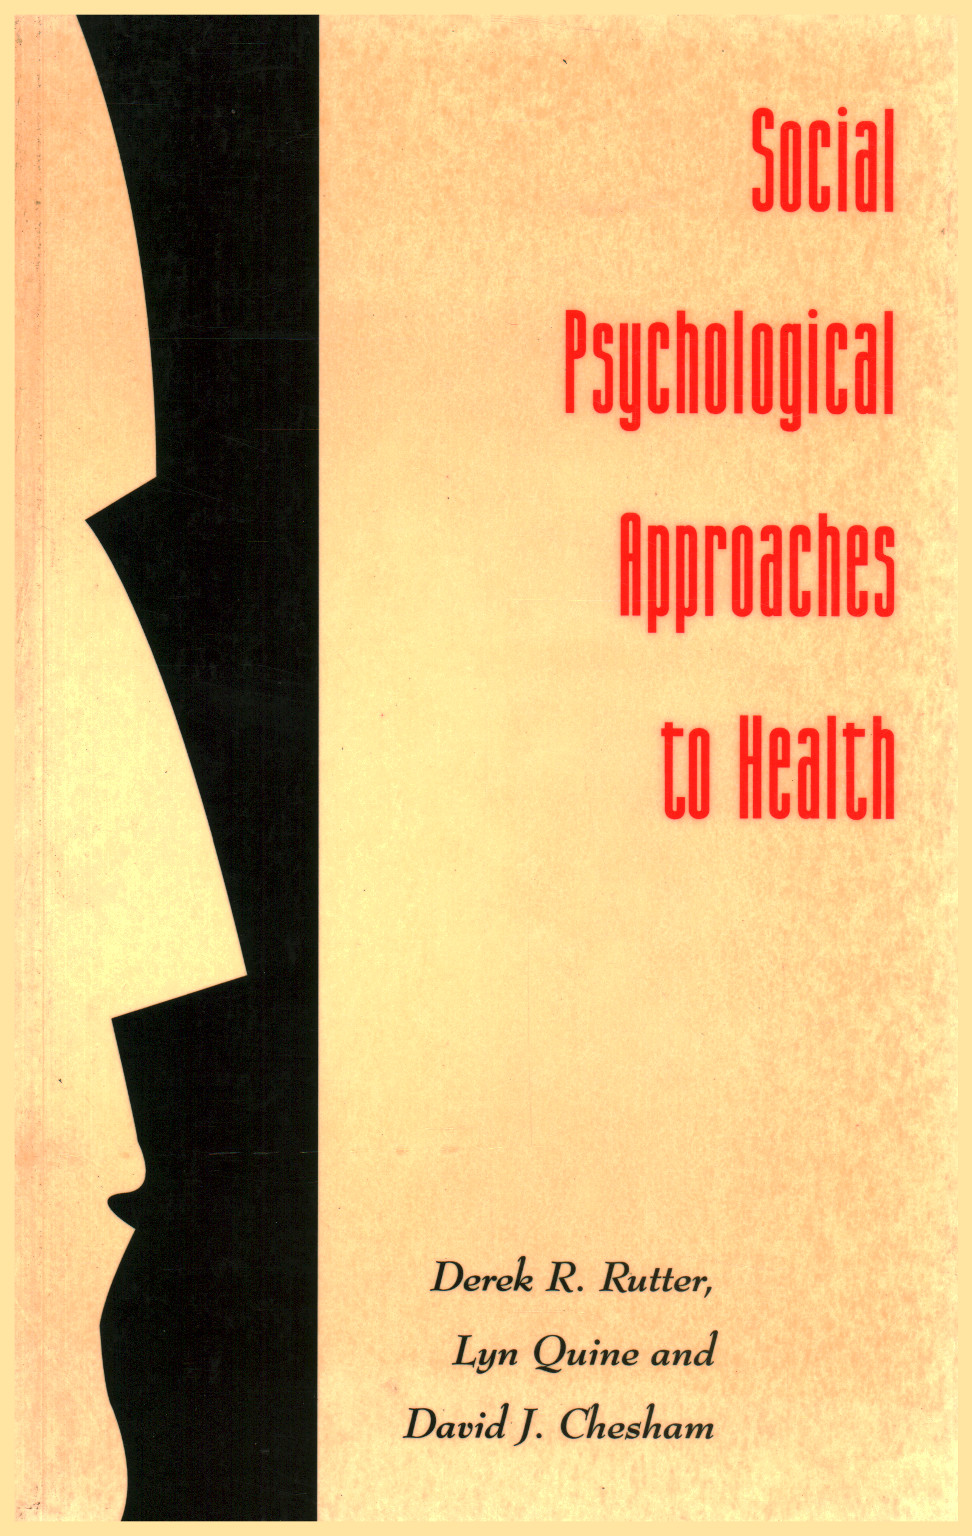 Social psychological approaches to health, s.a.